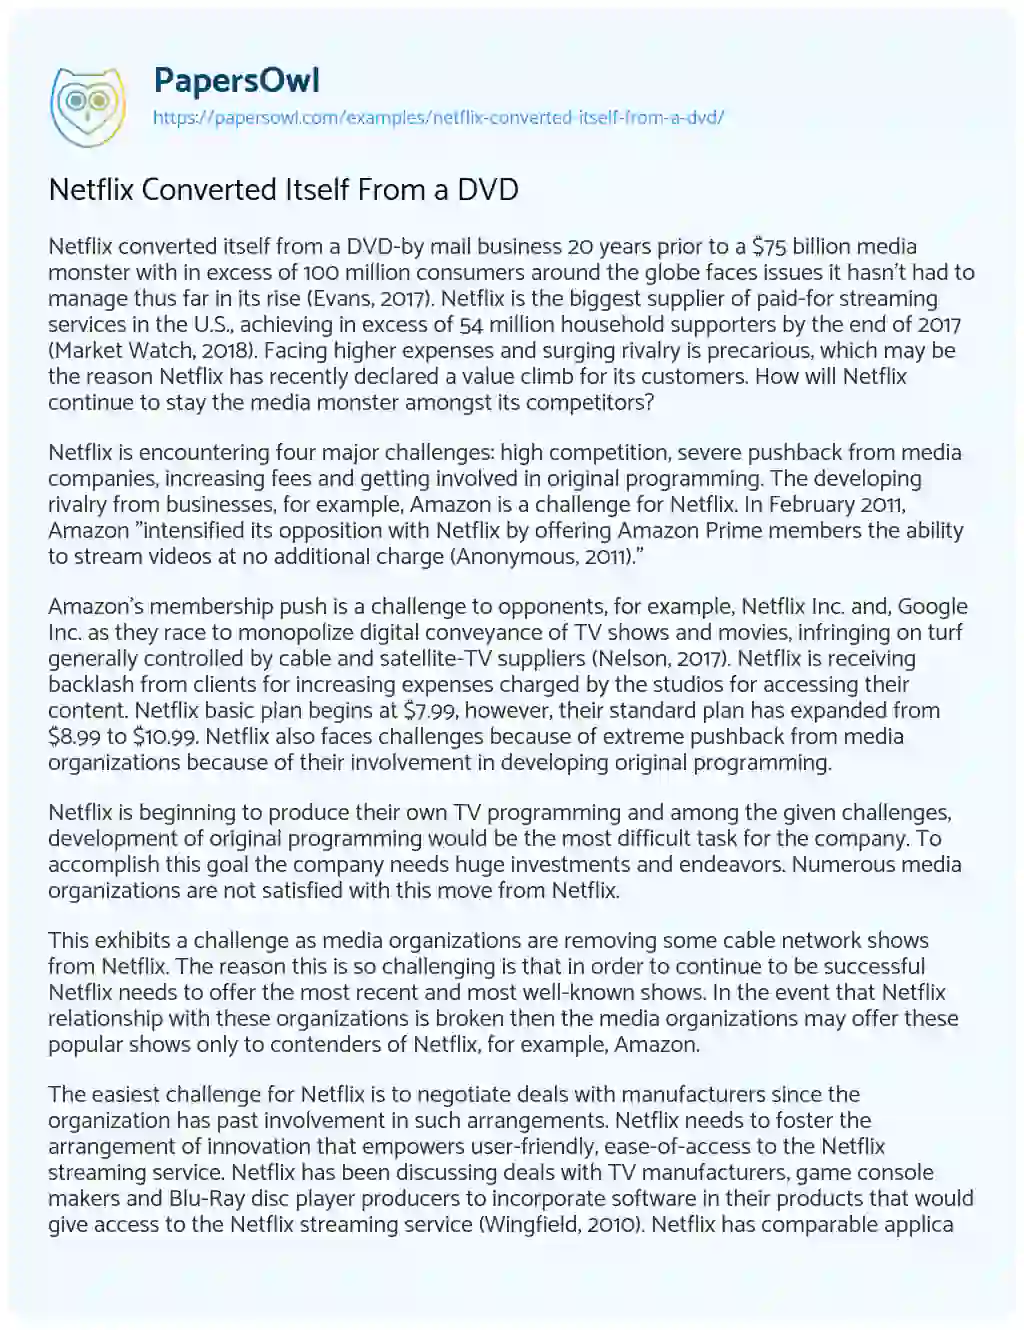 Essay on Netflix Converted itself from a DVD